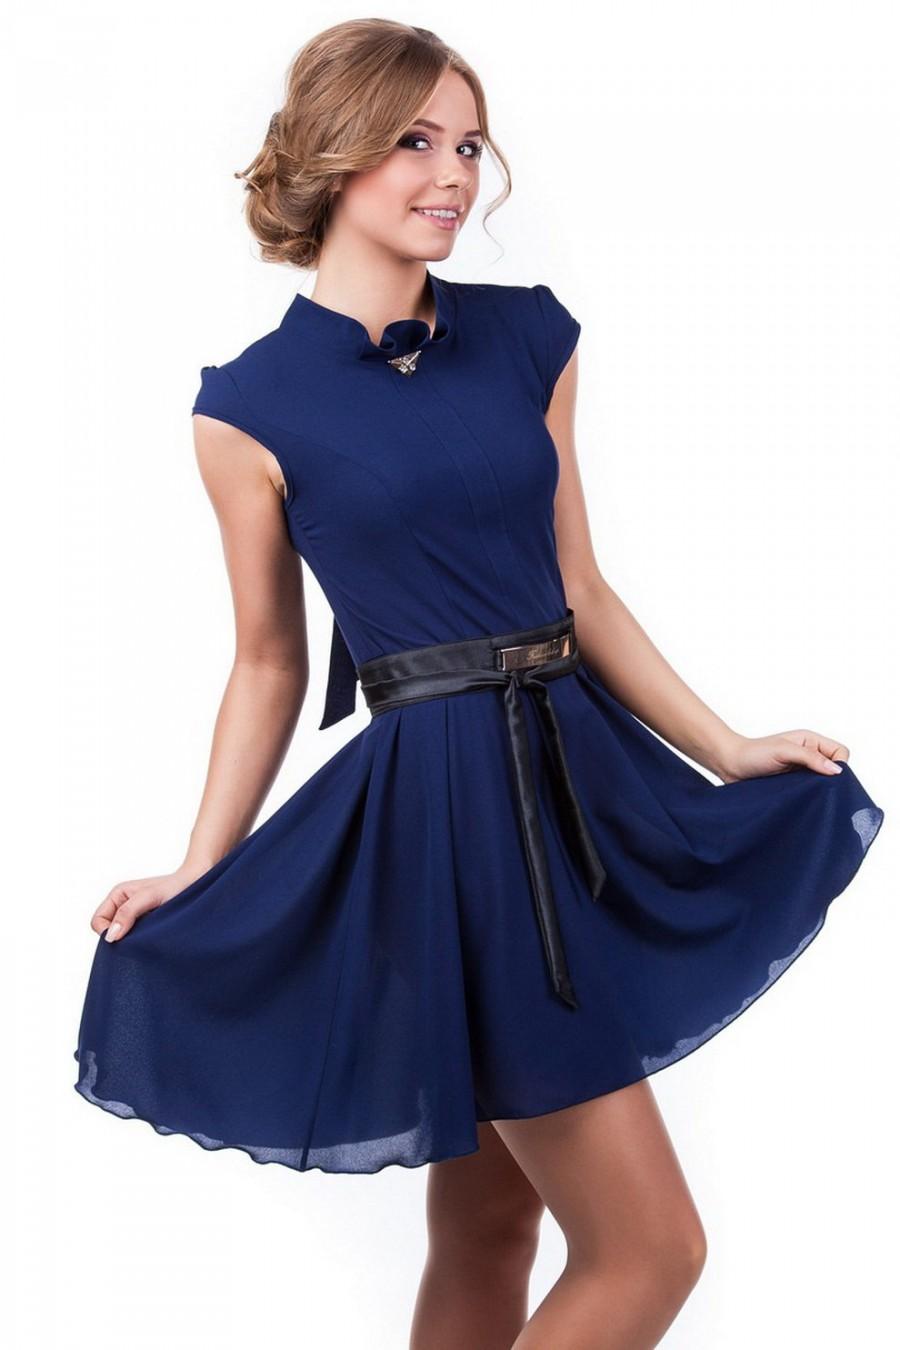 Свадьба - Cocktail dress Navy blue Formal chiffon dress. Dress knee length bridesmaid. Prom flared dress with lace and bow on the back. Evening dress.